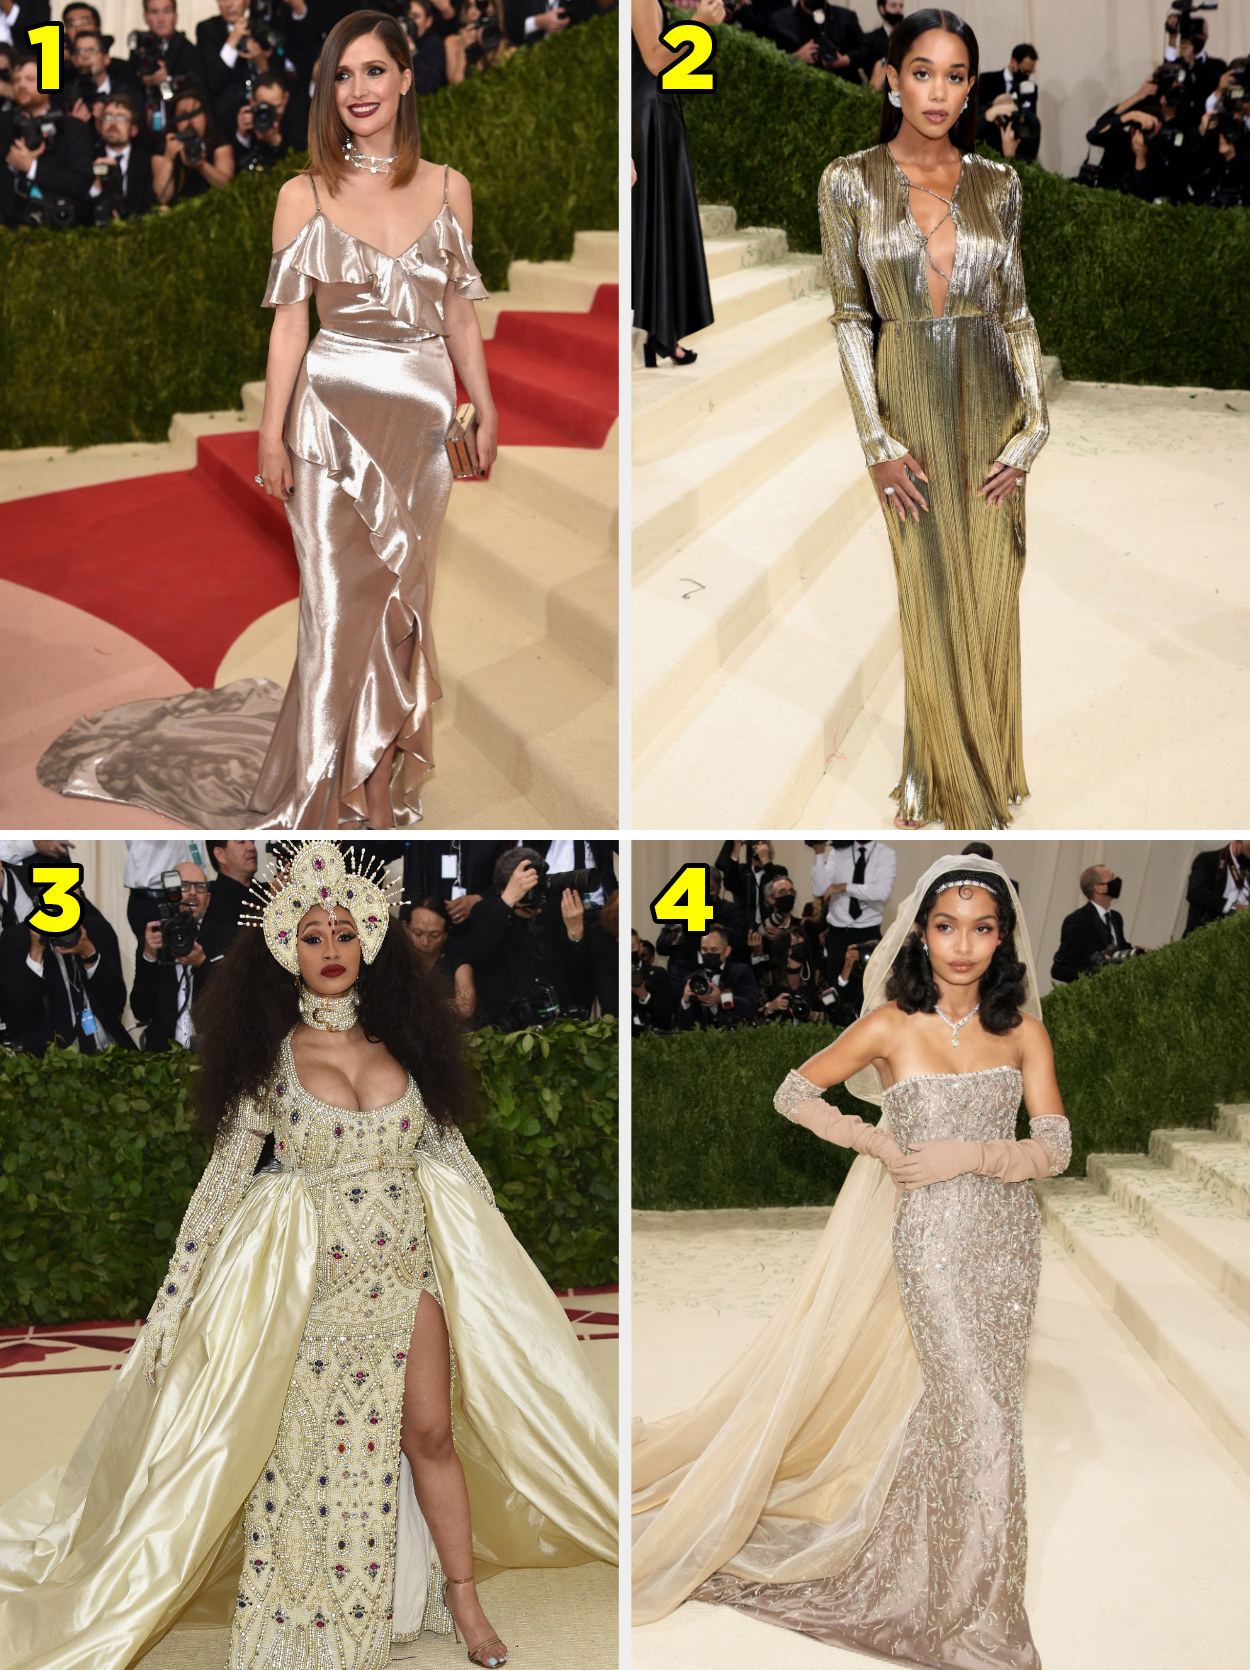 1. An off shoulder gown with ruffles on sleeves and down the front of skirt. 2. A long-sleeve gown laced up on the bodice. 3. A longsleeved gown covered in jewels and a matching crown. 4. Strapless gown with matching gloves and veil